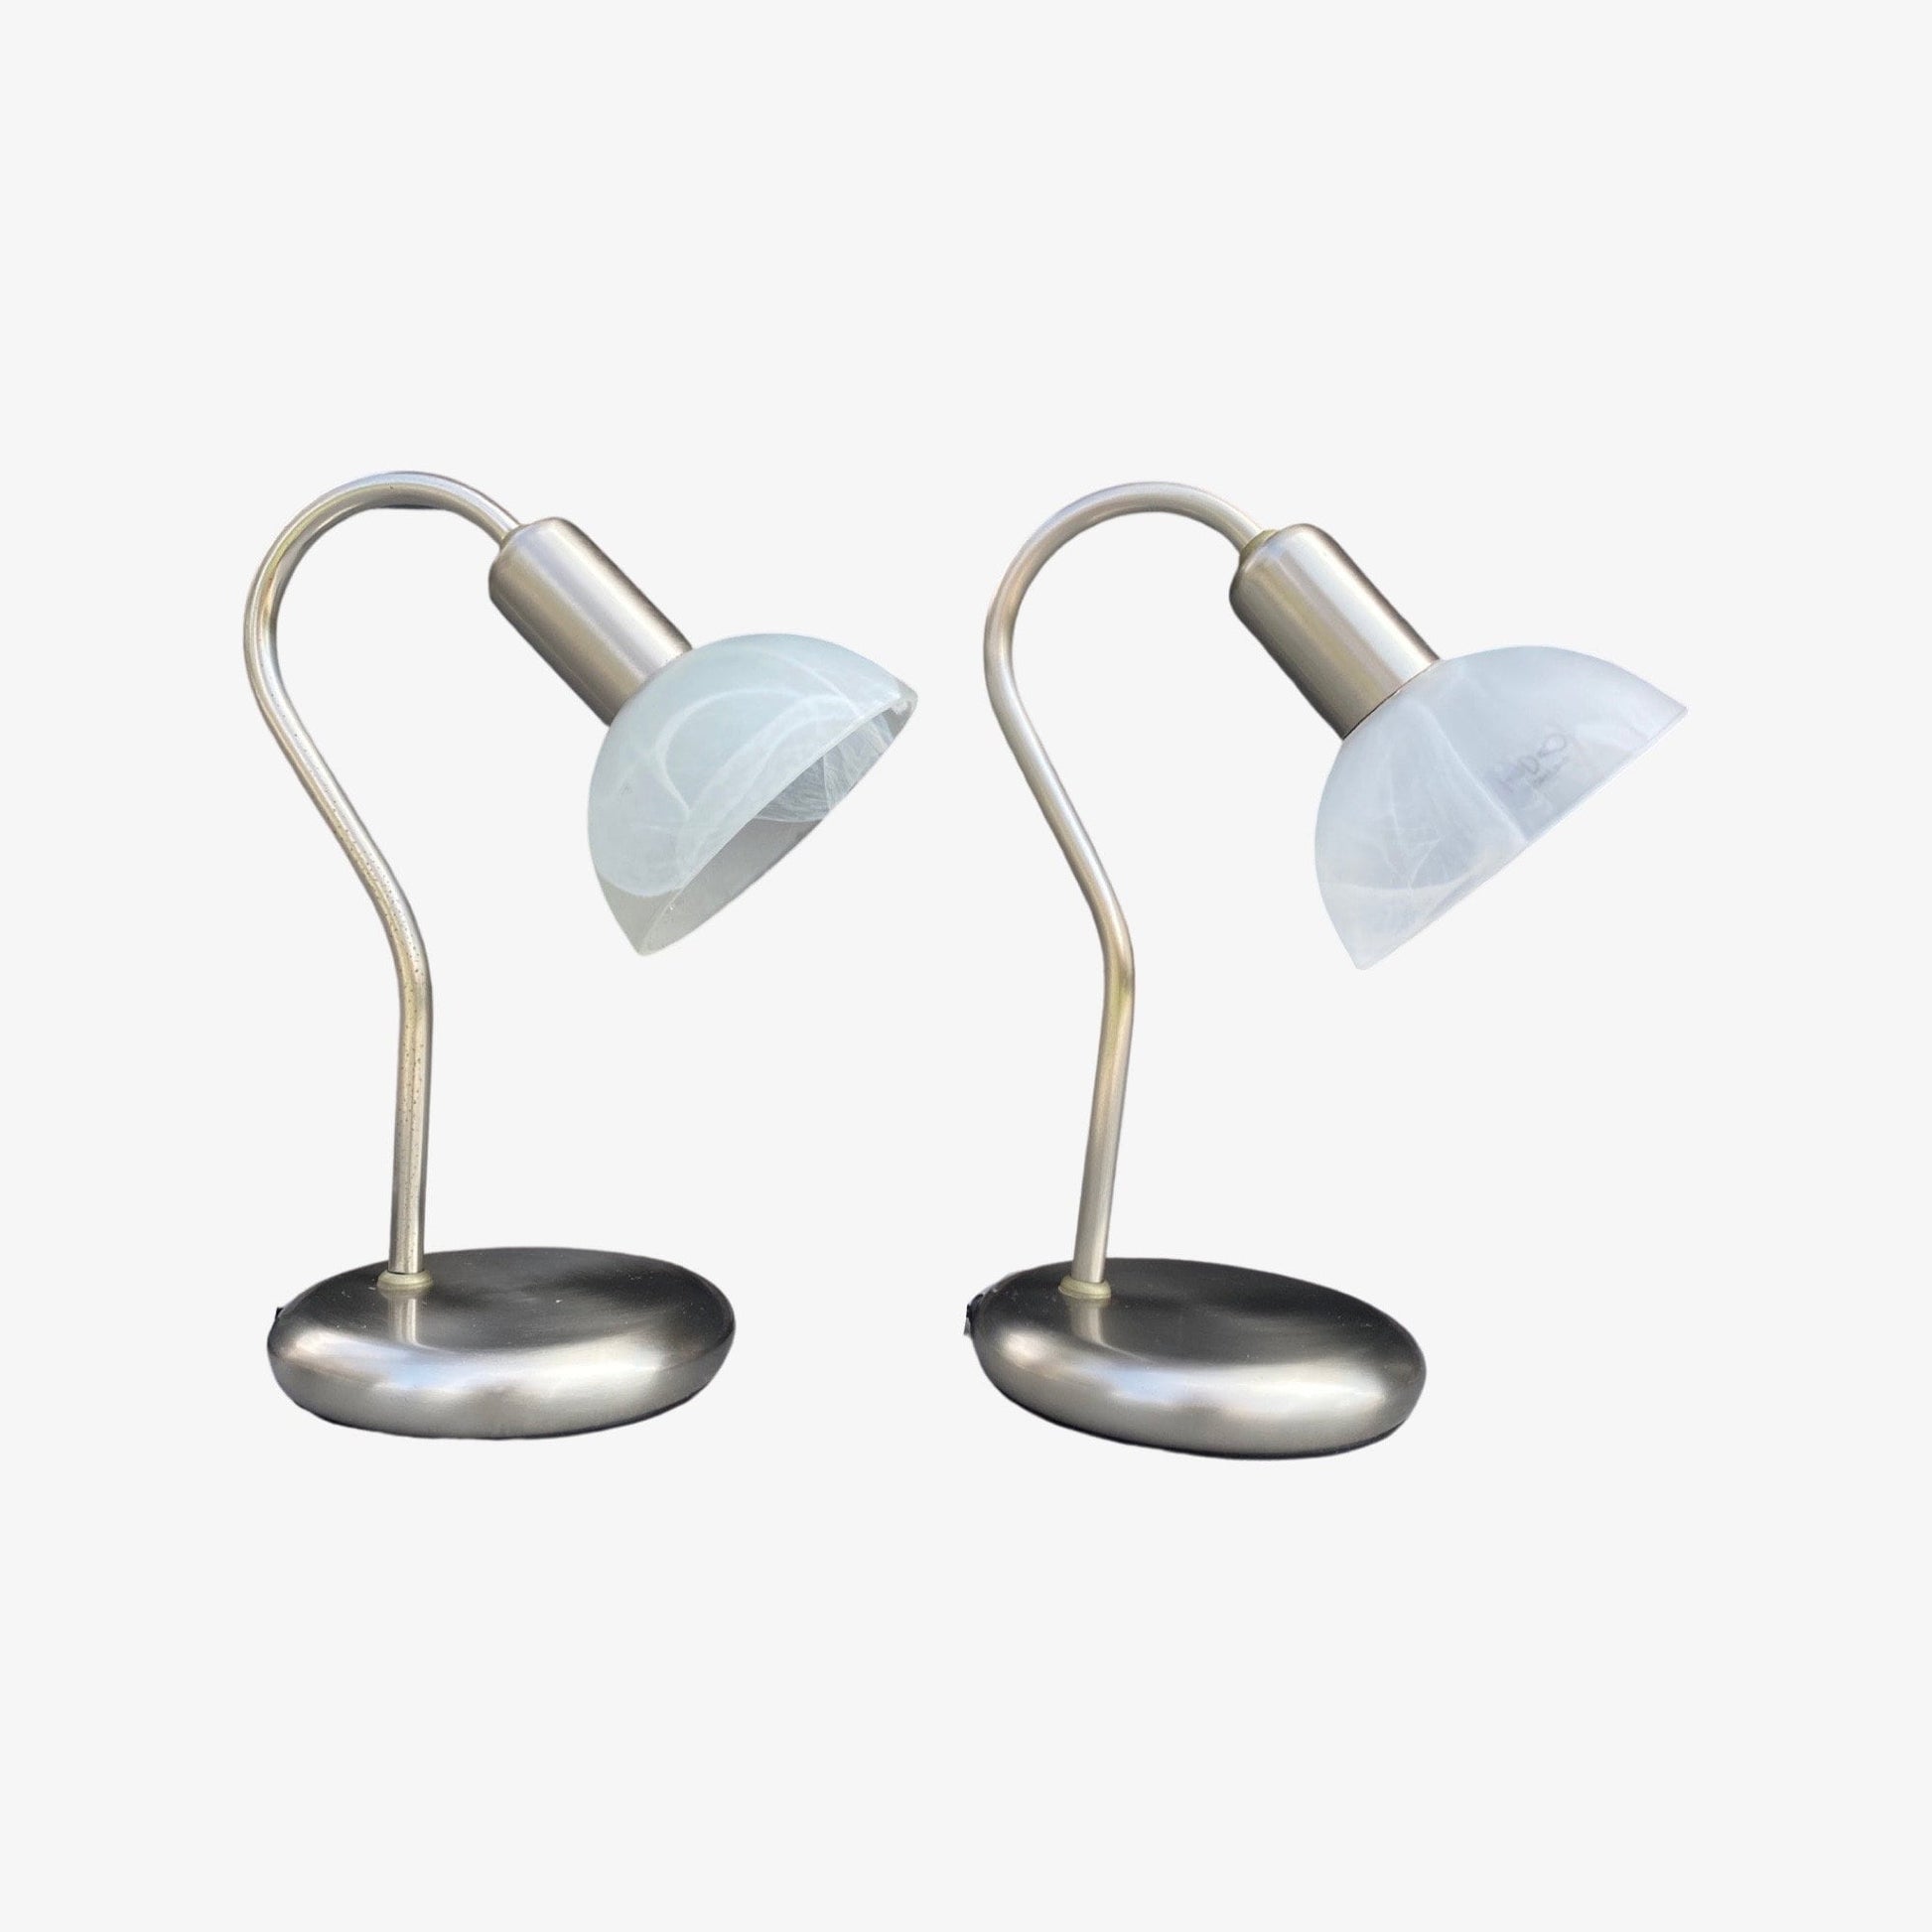 2 Retro BRILLIANT Night Lights | Brushed Chrome Metal Table Lights with Alabaster Glass Shades | Set of 2 Mid Century Night Lights 1970s - FancyVintage.nl -